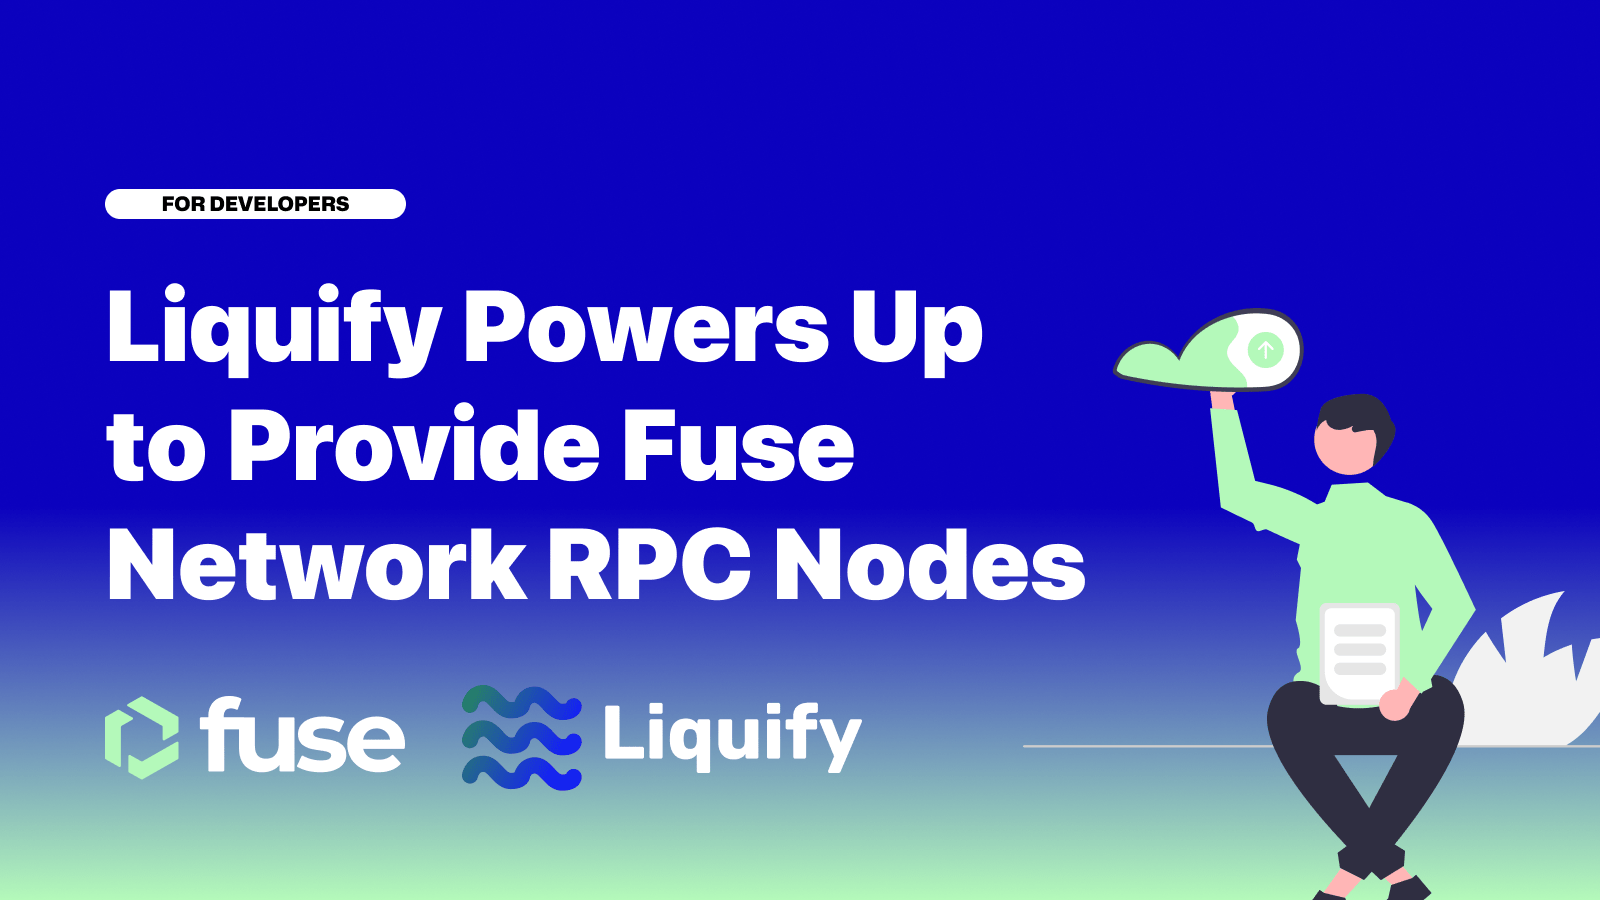 Fuse Network RPC